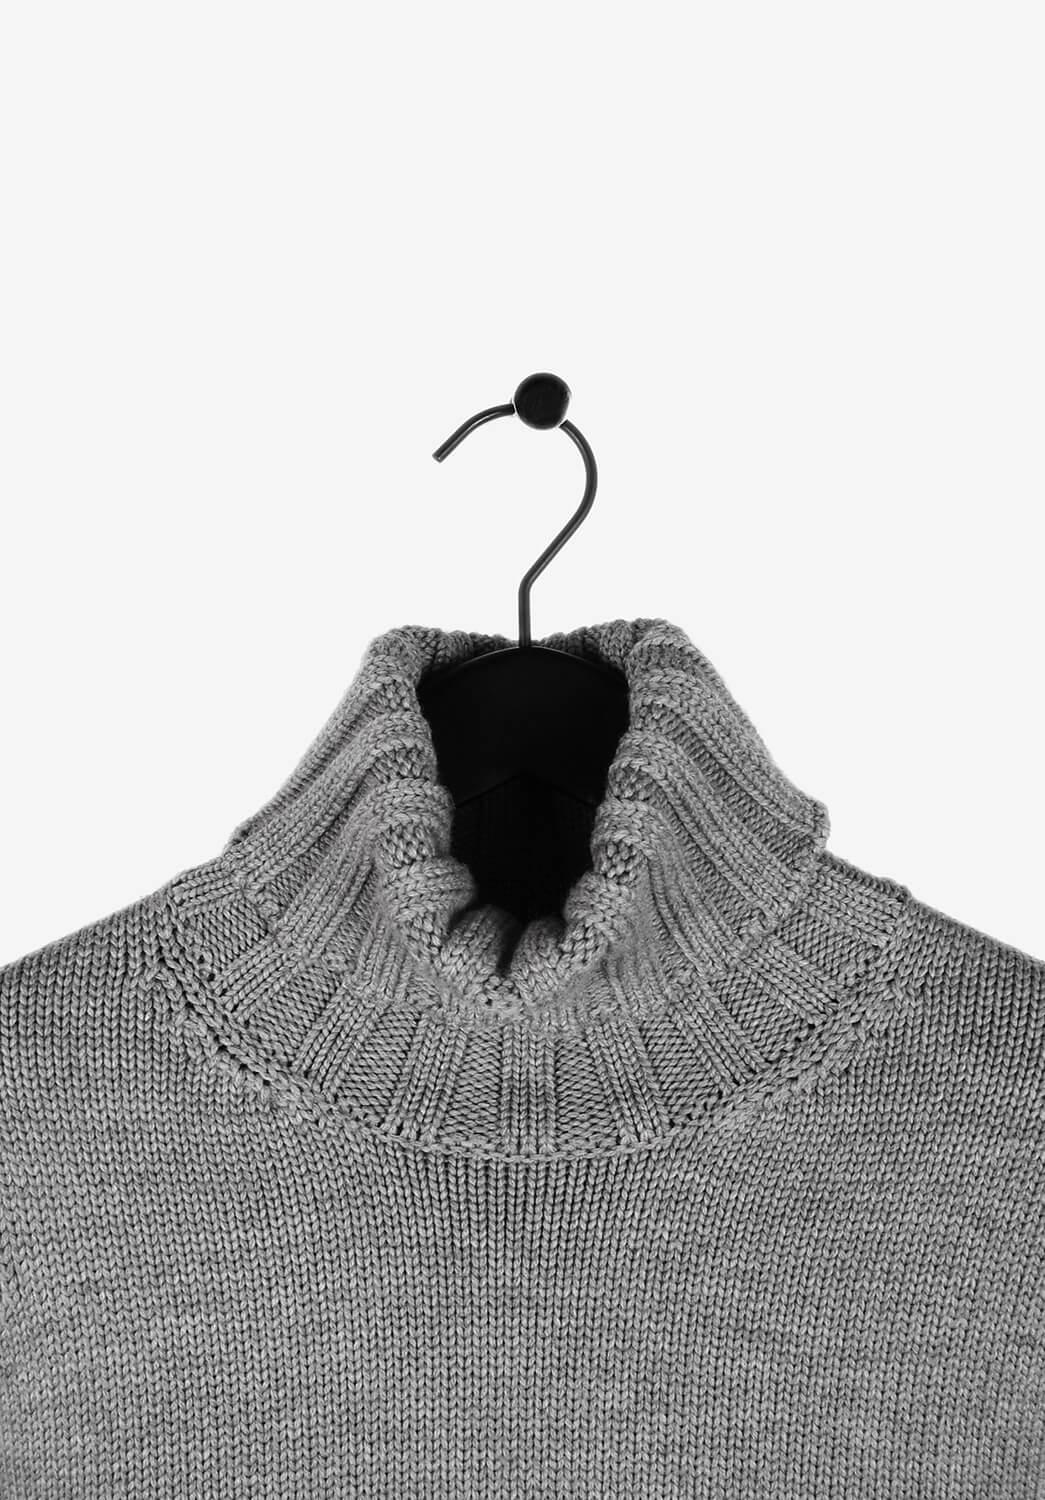 Item for sale is 100% genuine Dior Homme AW02 Hedi Slimane Sweater
Color: Grey
(An actual color may a bit vary due to individual computer screen interpretation)
Material: 100% merino wool
Tag size: M
This sweater is great quality item. Rate 9 of 10,